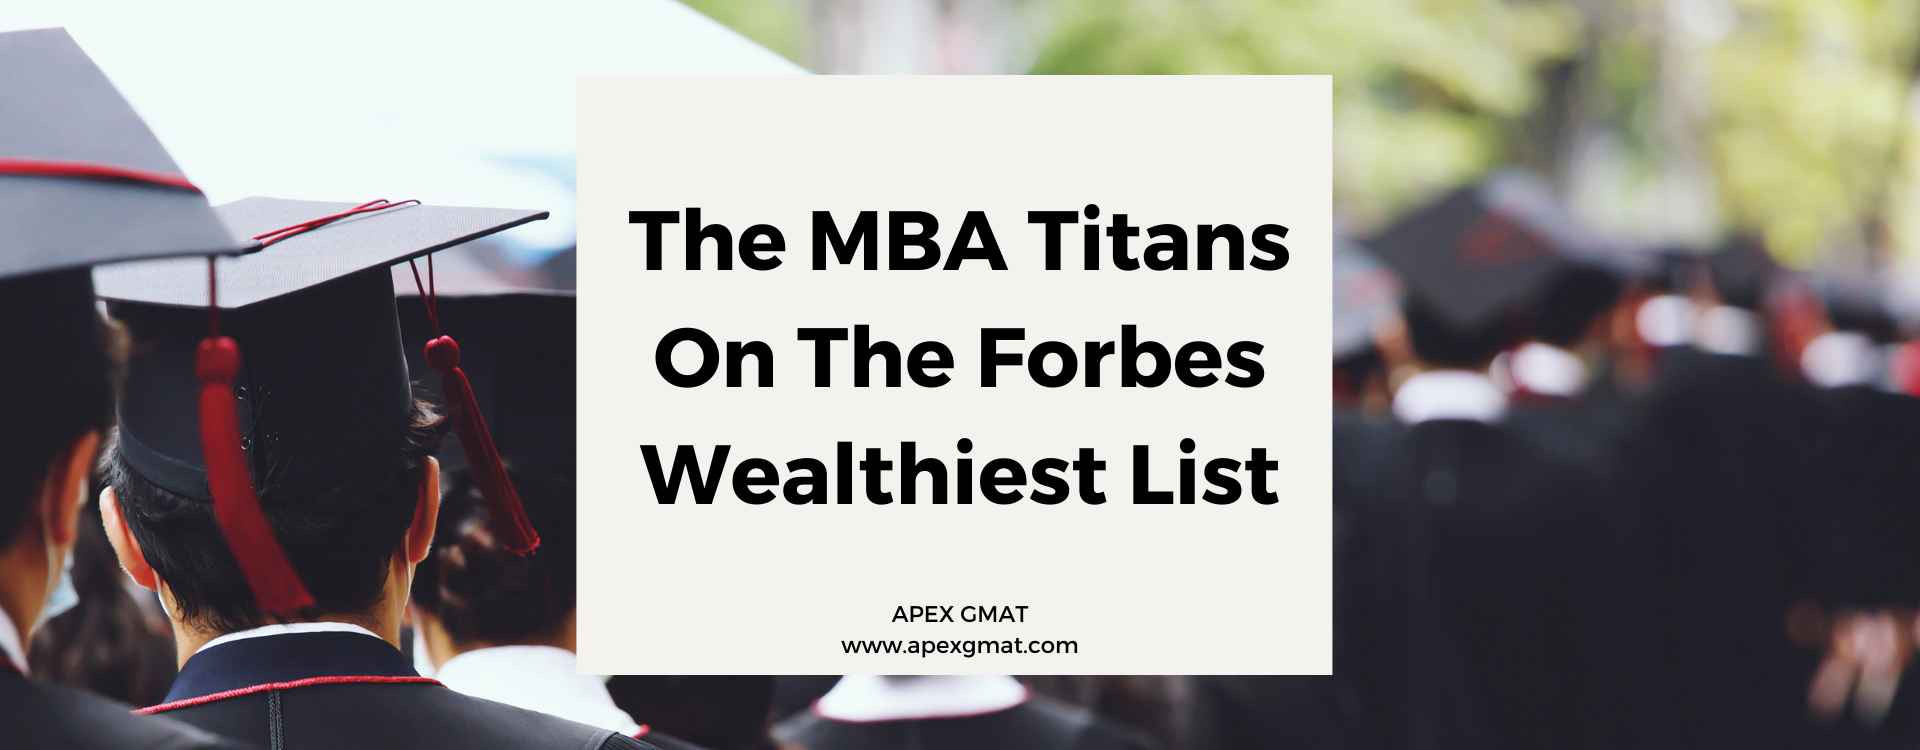 The MBA Titans on The Forbes Wealthiest List